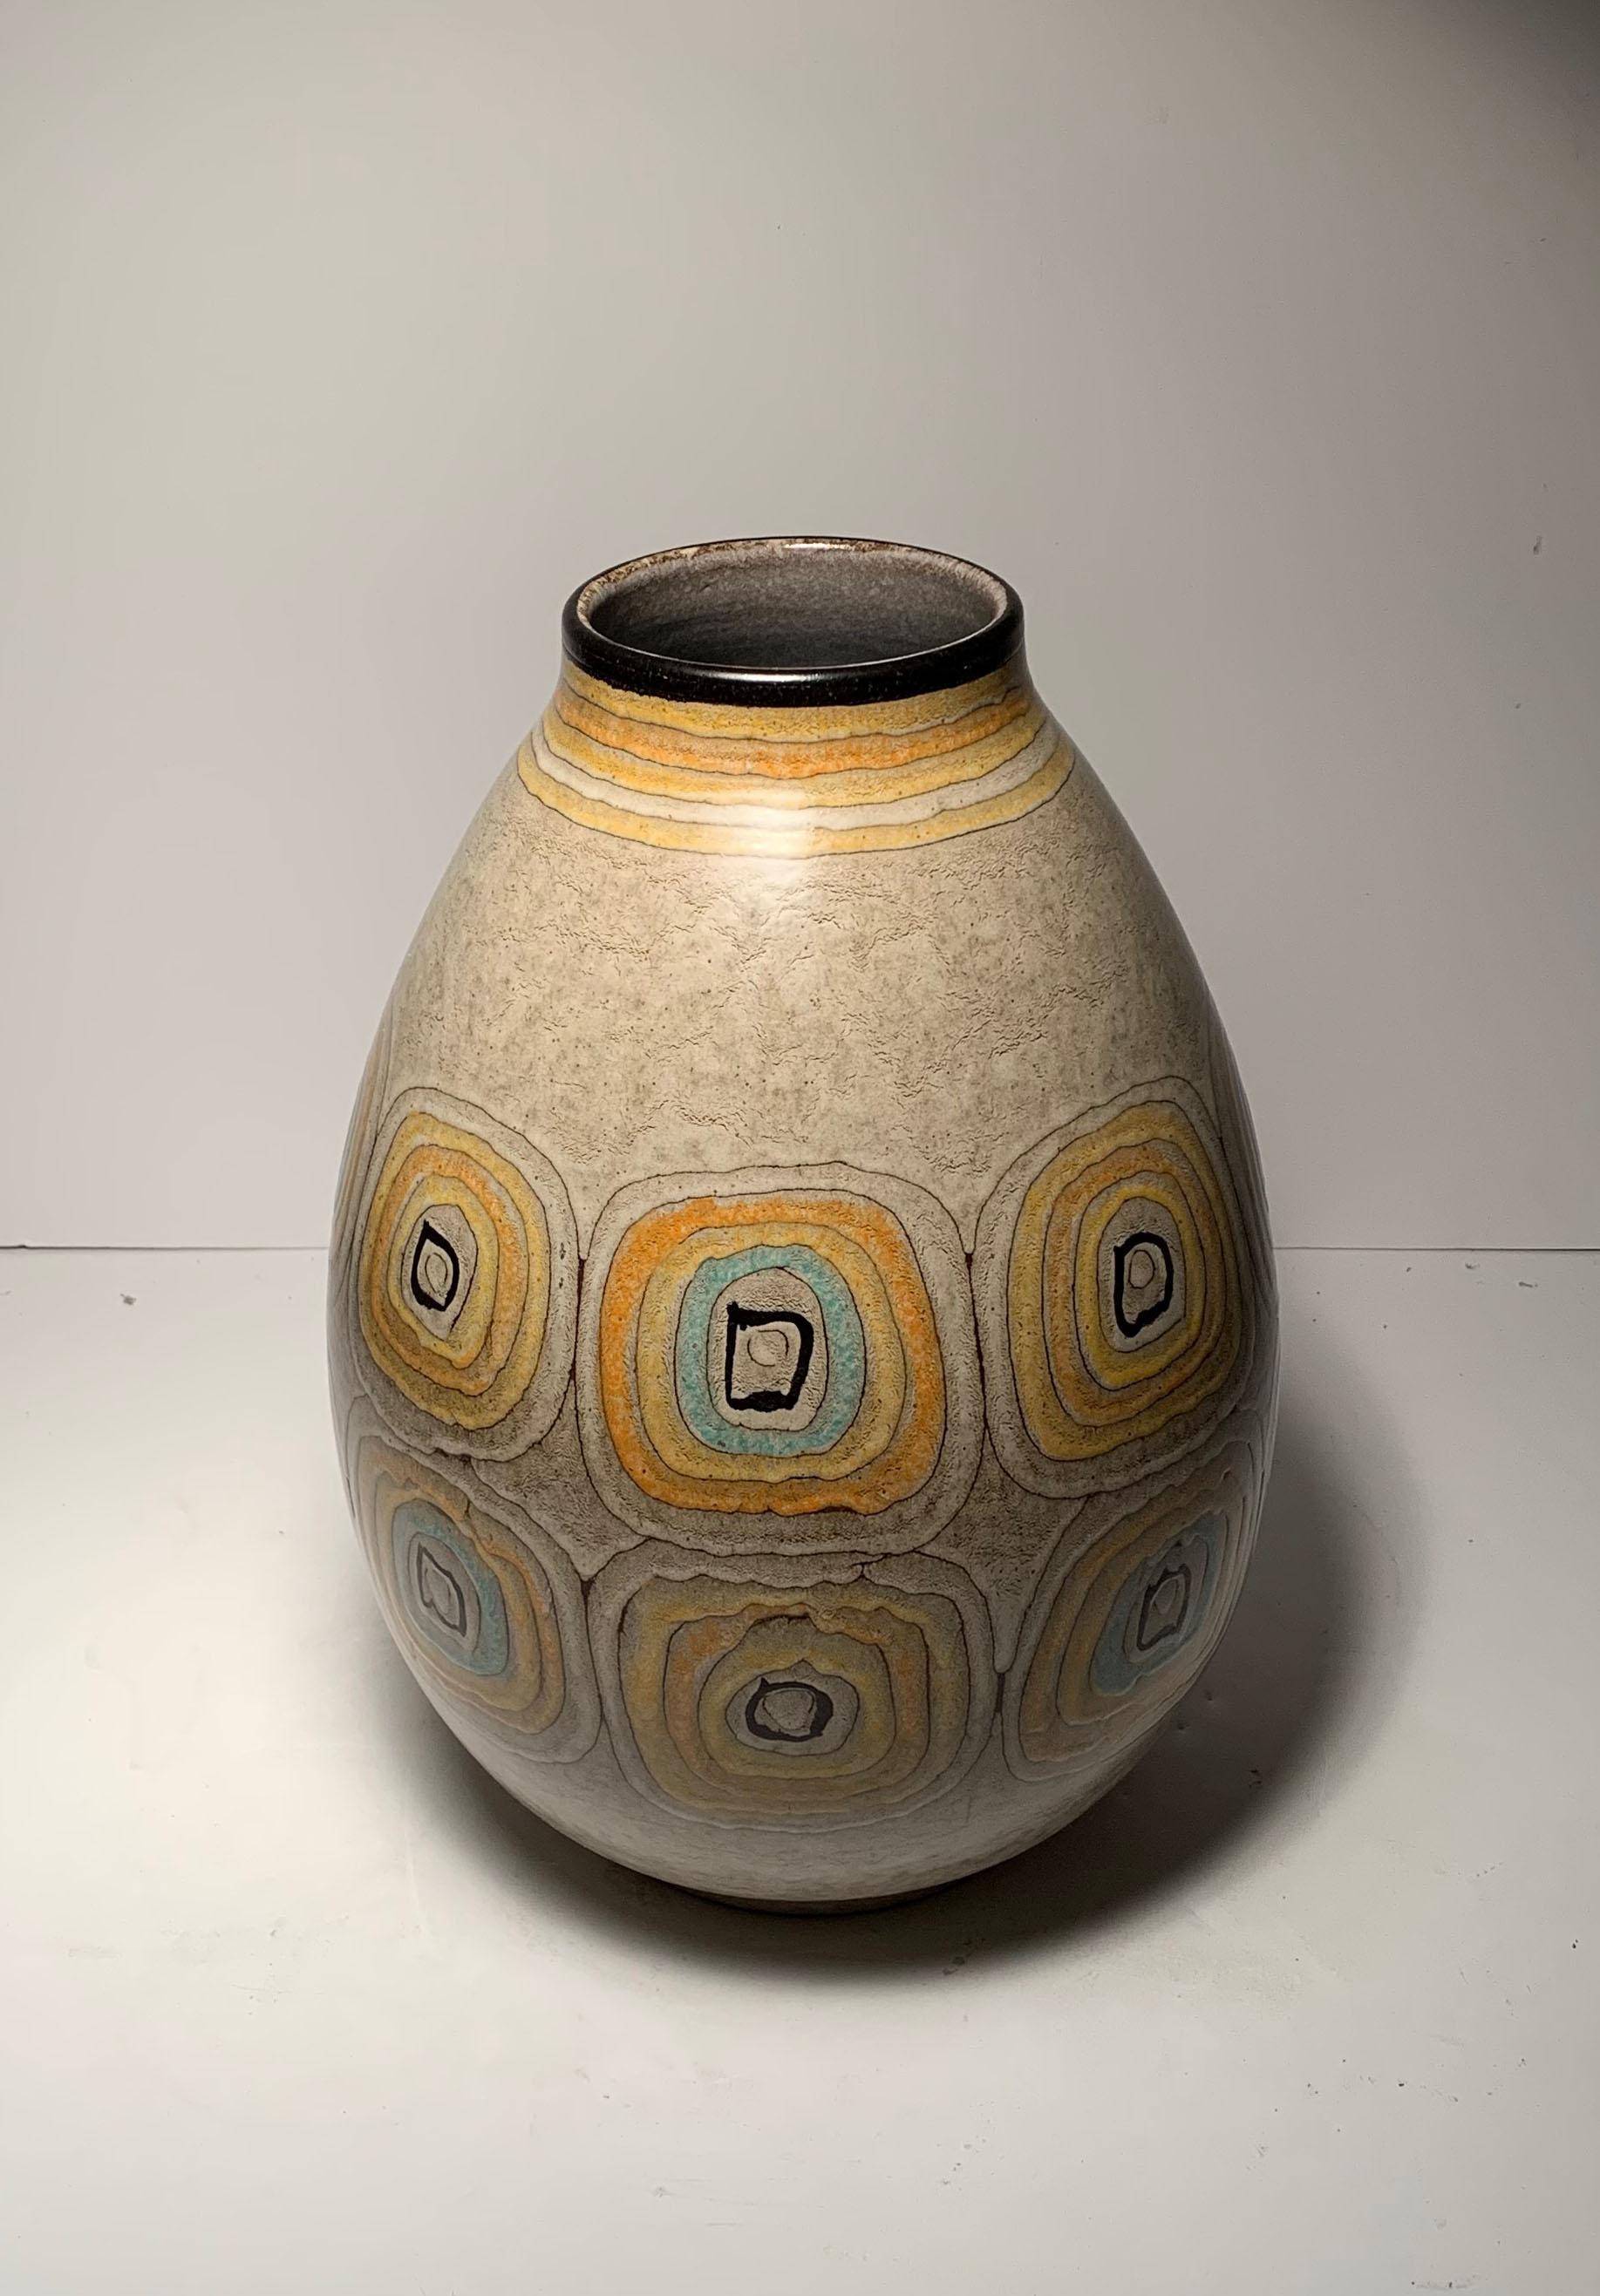 A large Alvino Bagne signed ceramic vase. Probably imported through Raymor. This an unusually large form. Style of Aldo Londi Bitossi, Fantoni

One chip at base of foot. Very difficult to notice, in less looking from the bottom. A simple restoration